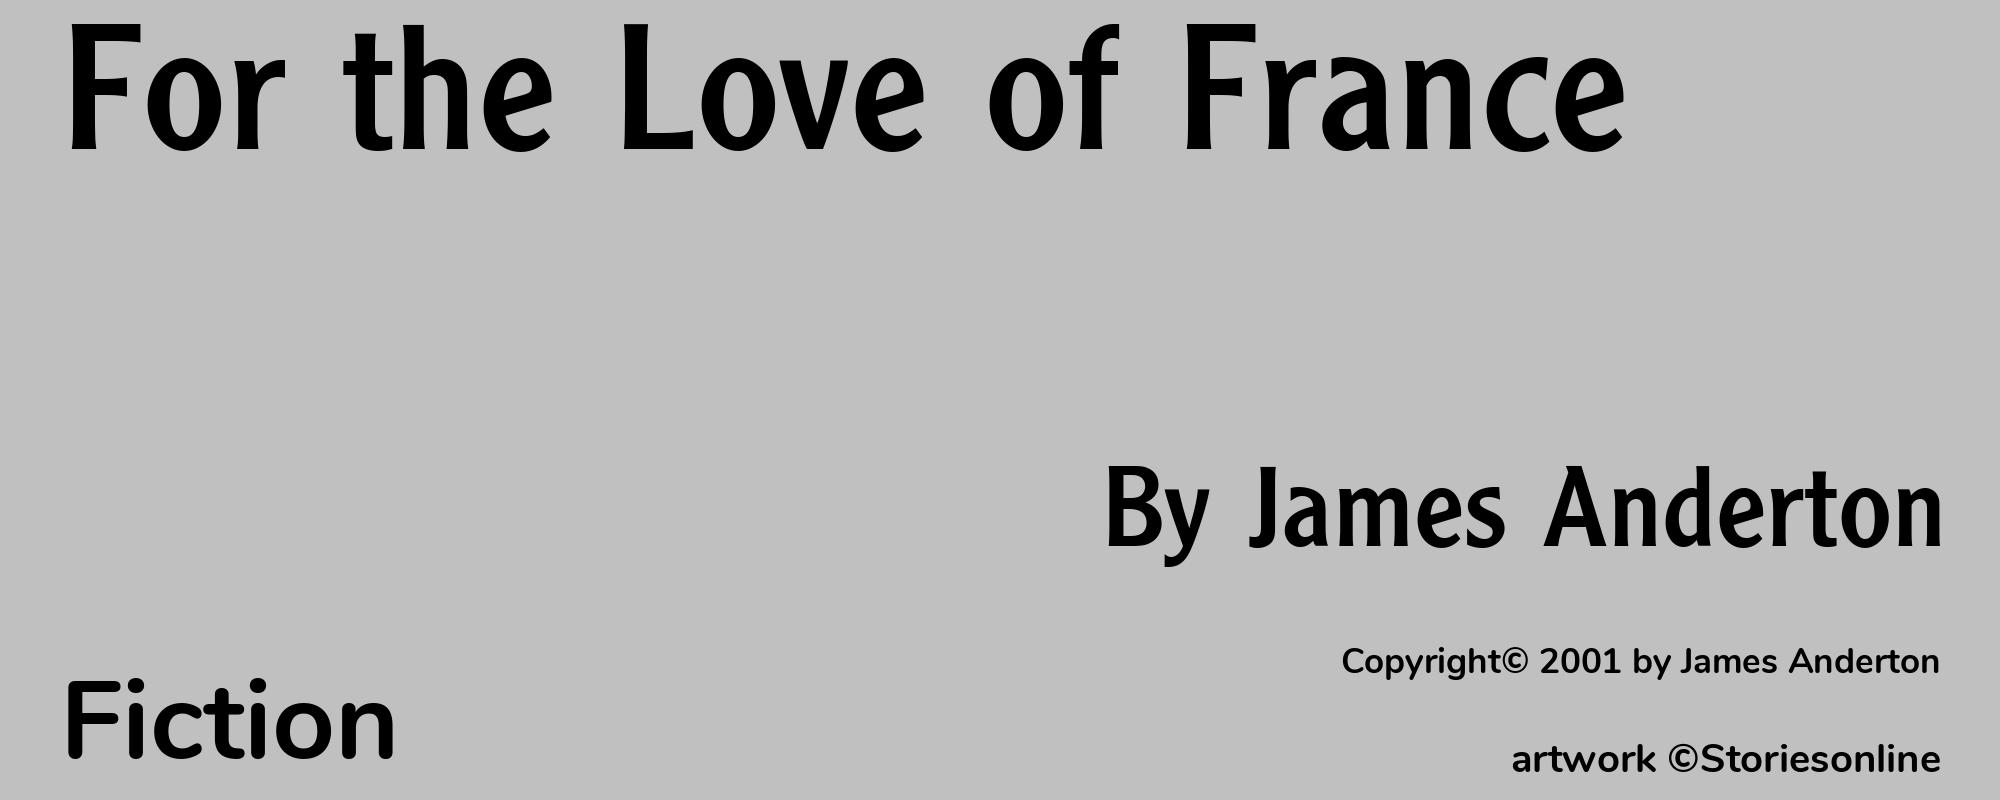 For the Love of France - Cover